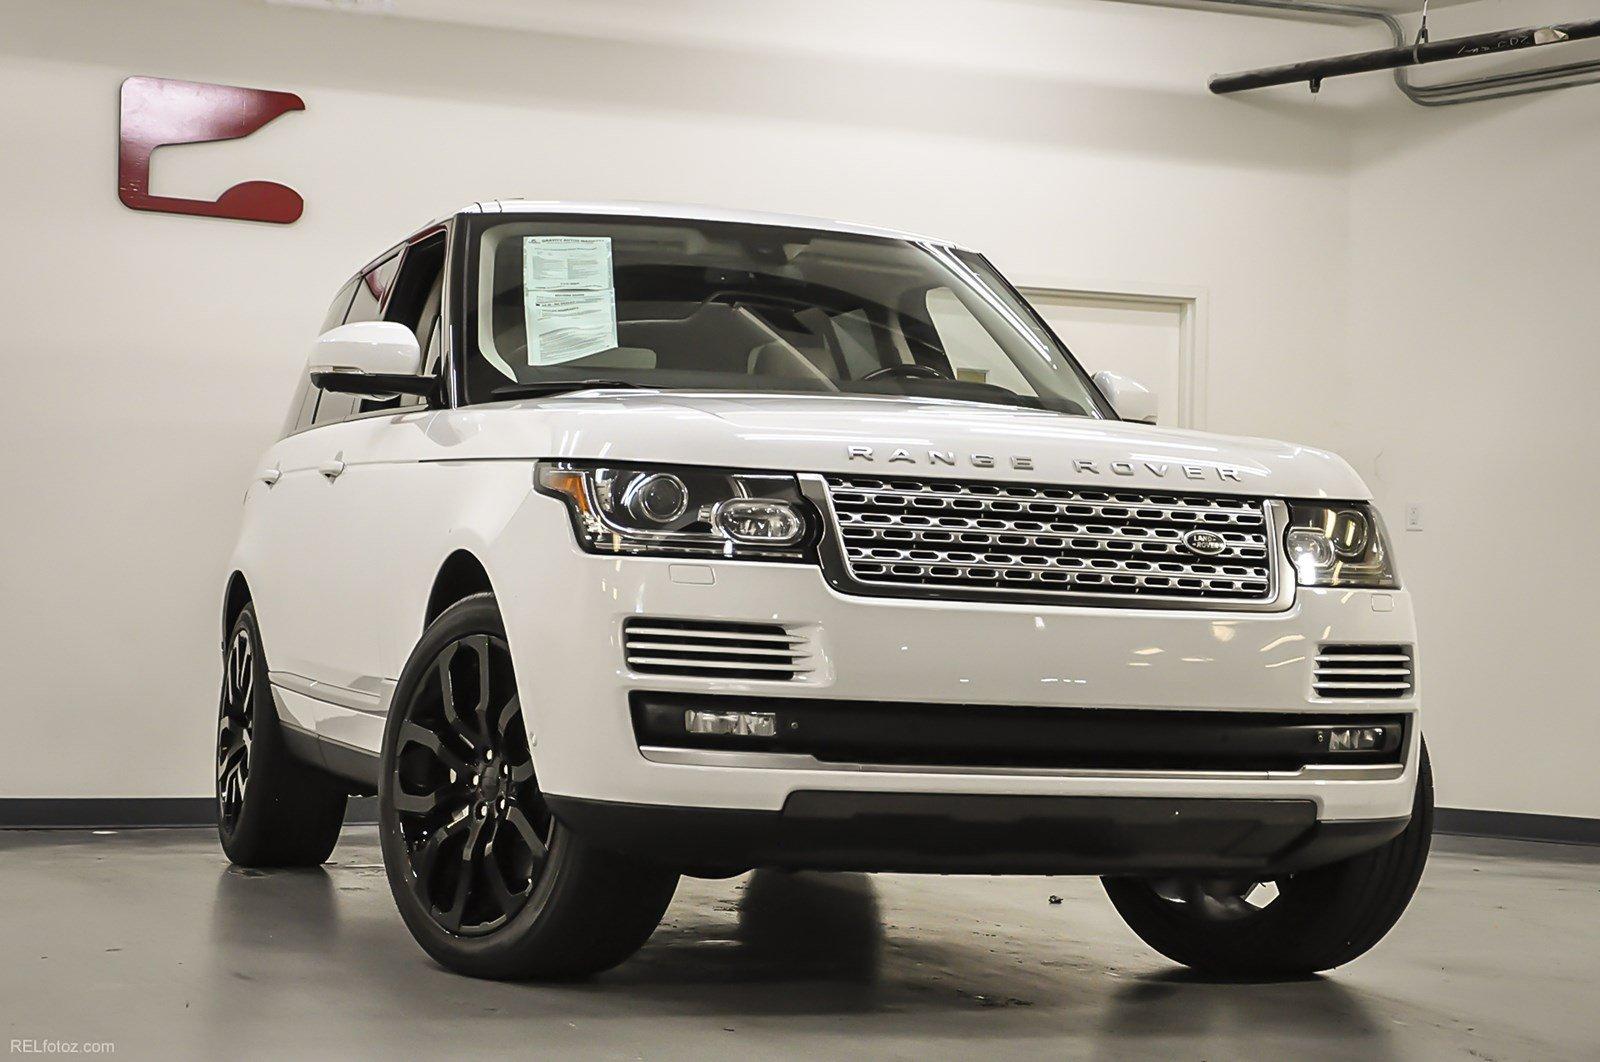 Used 2014 Land Rover Range Rover 5.0L V8 Supercharged for sale Sold at Gravity Autos Marietta in Marietta GA 30060 2